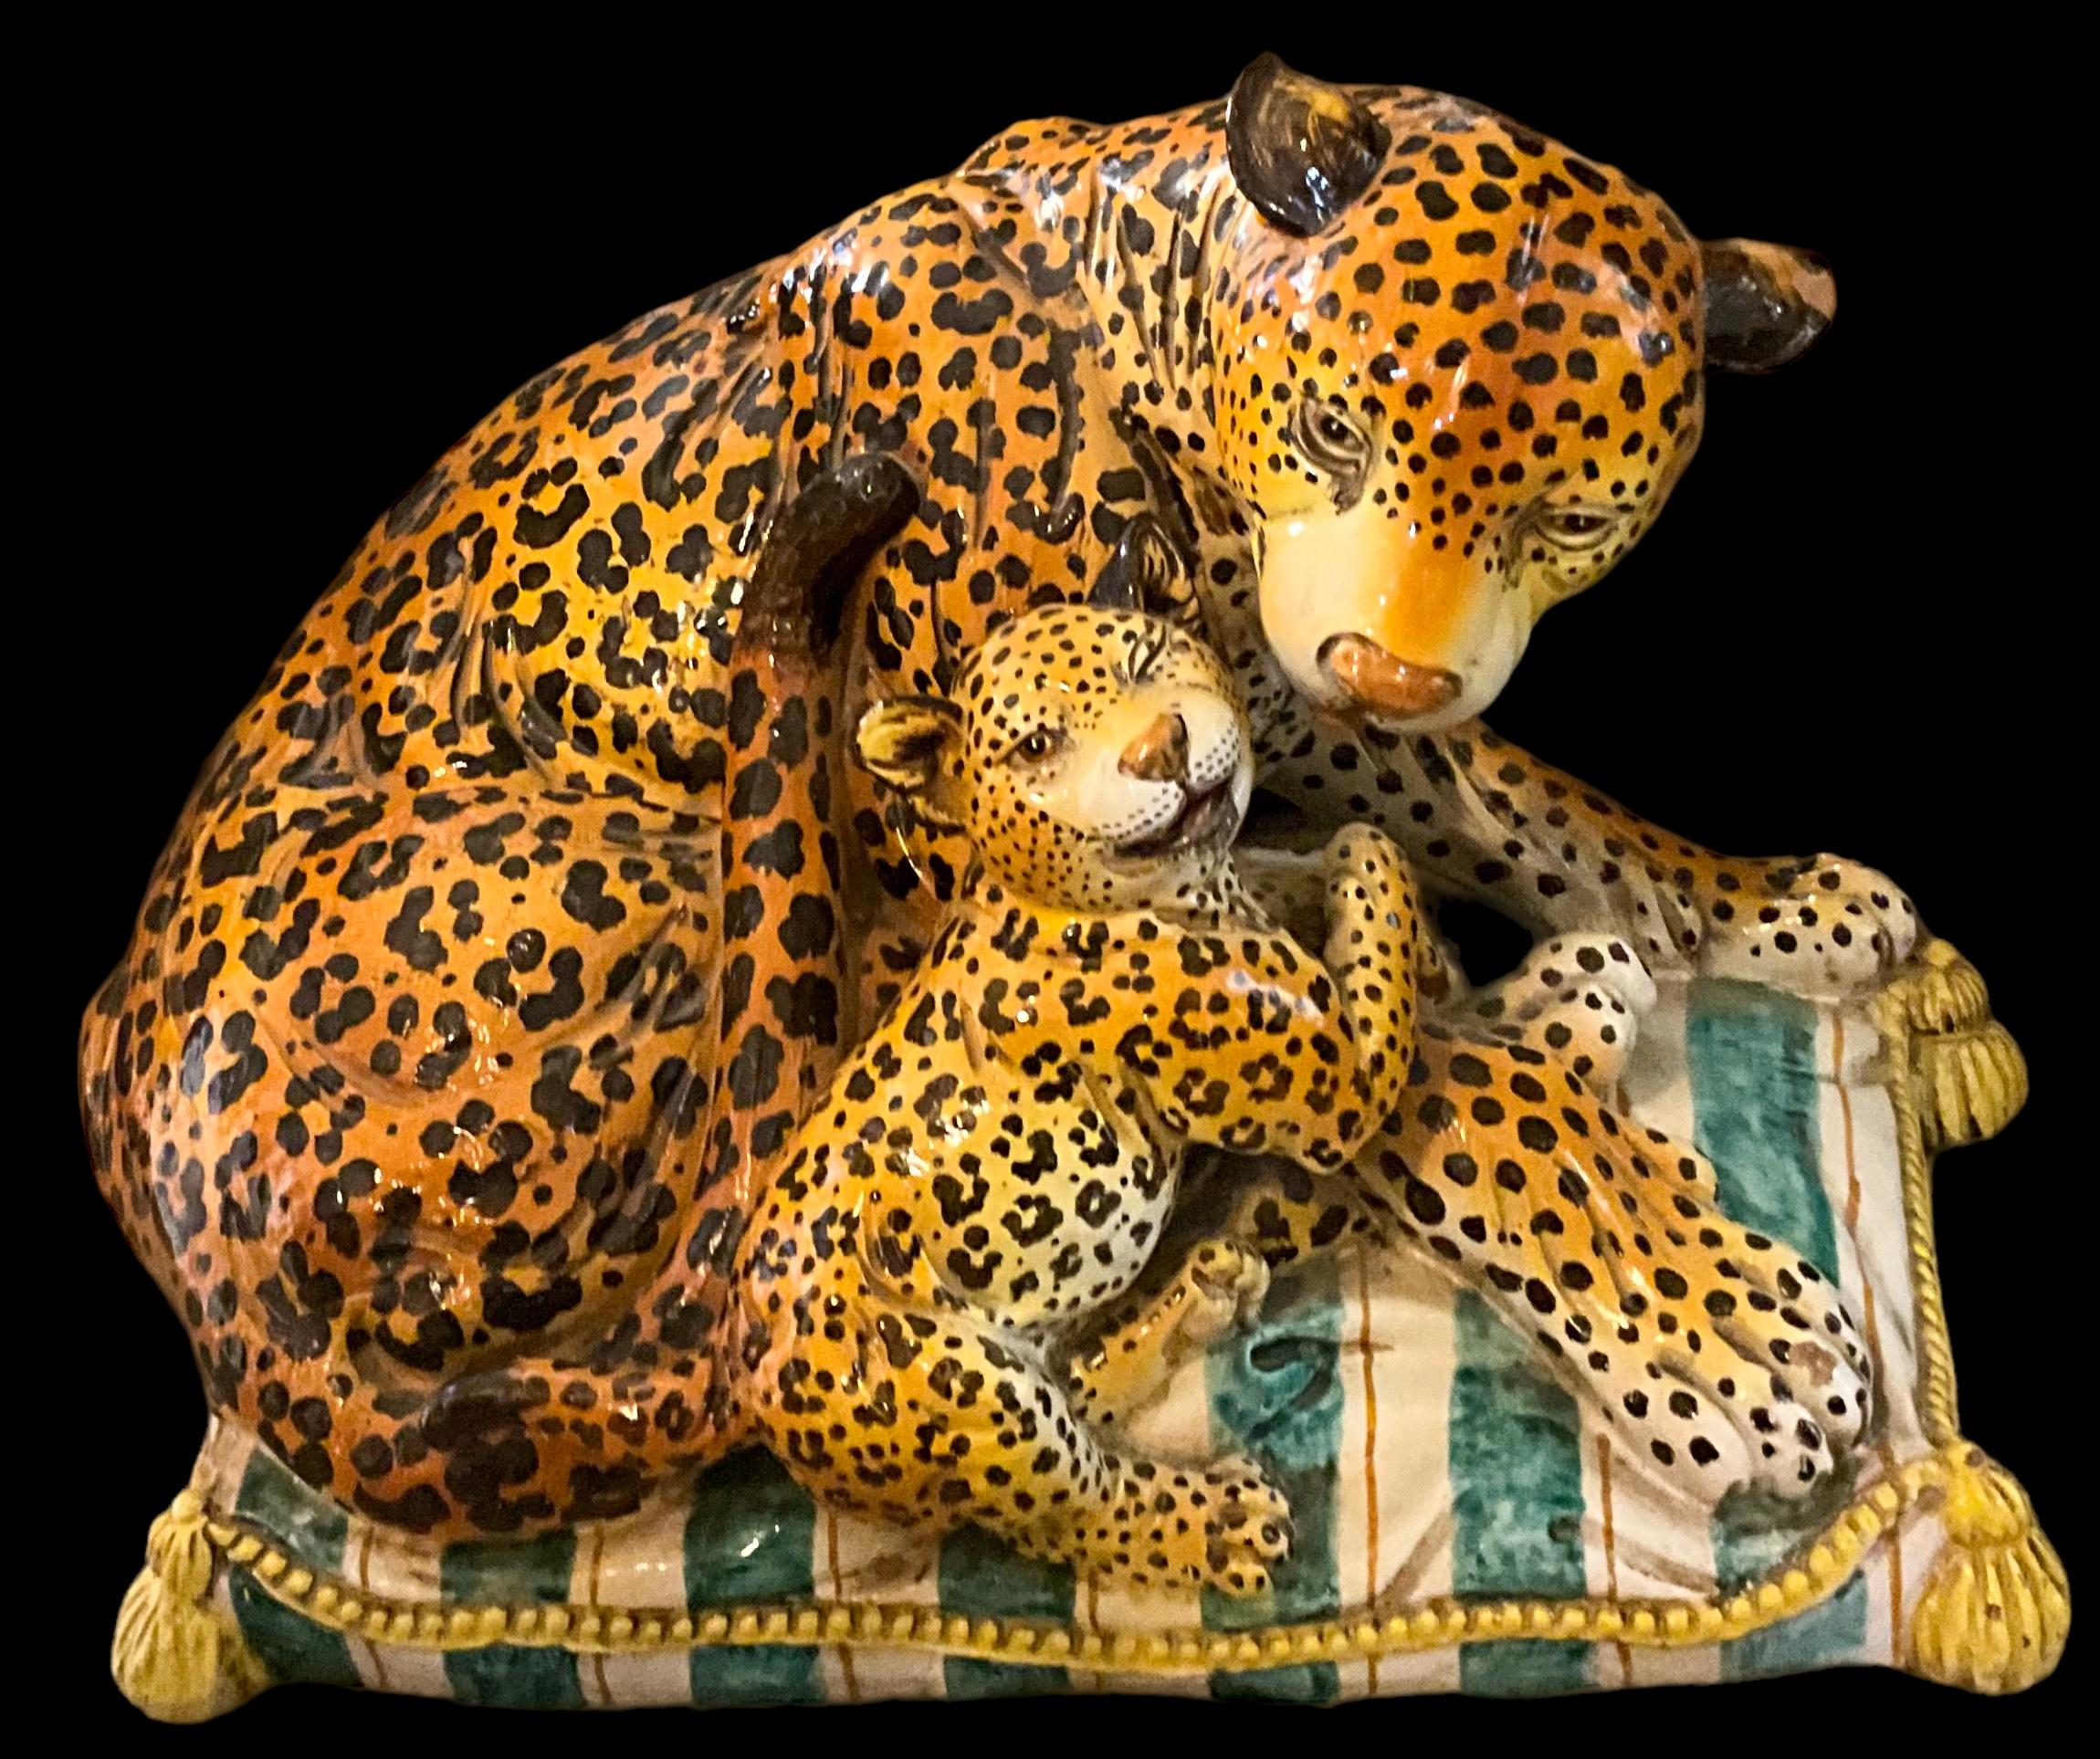 This is a rare piece! It is a Hollywood Regency era terracotta mother leopard and cub reclining on a striped pillow, it is attributed to Meiselman Imports and was a limited production piece. It is extremely heavy, so white glove shipping only.

My